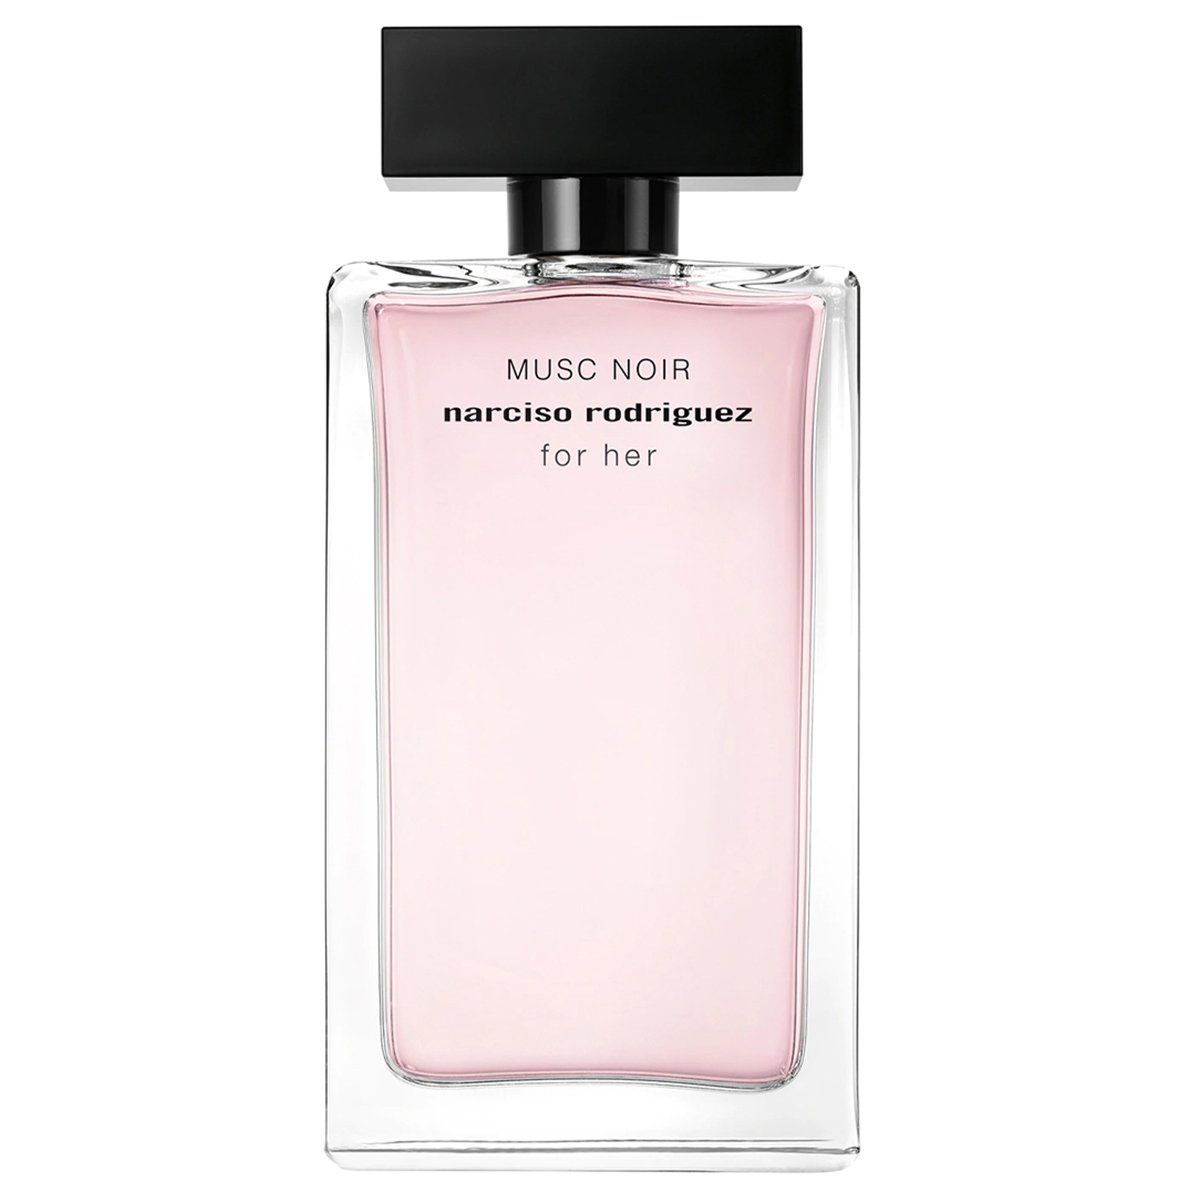  Narciso Rodriguez Musc Noir For Her 